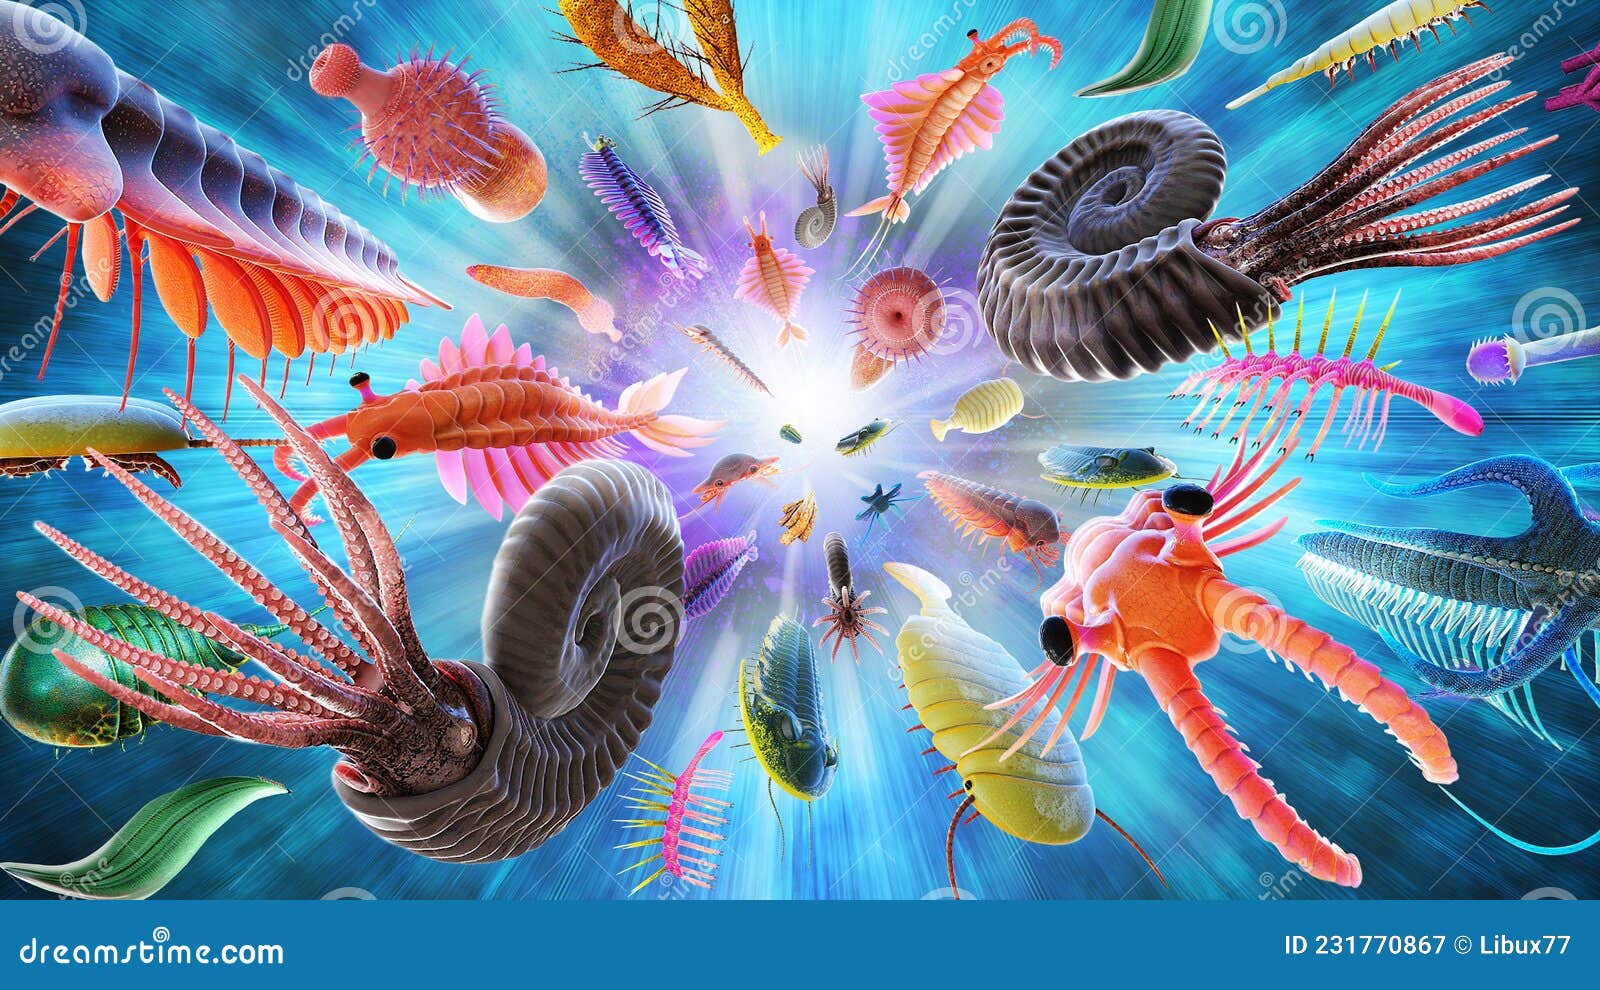 cambrian explosion or cambrian radiation event that was characterized by the appearance of many of the major phyla